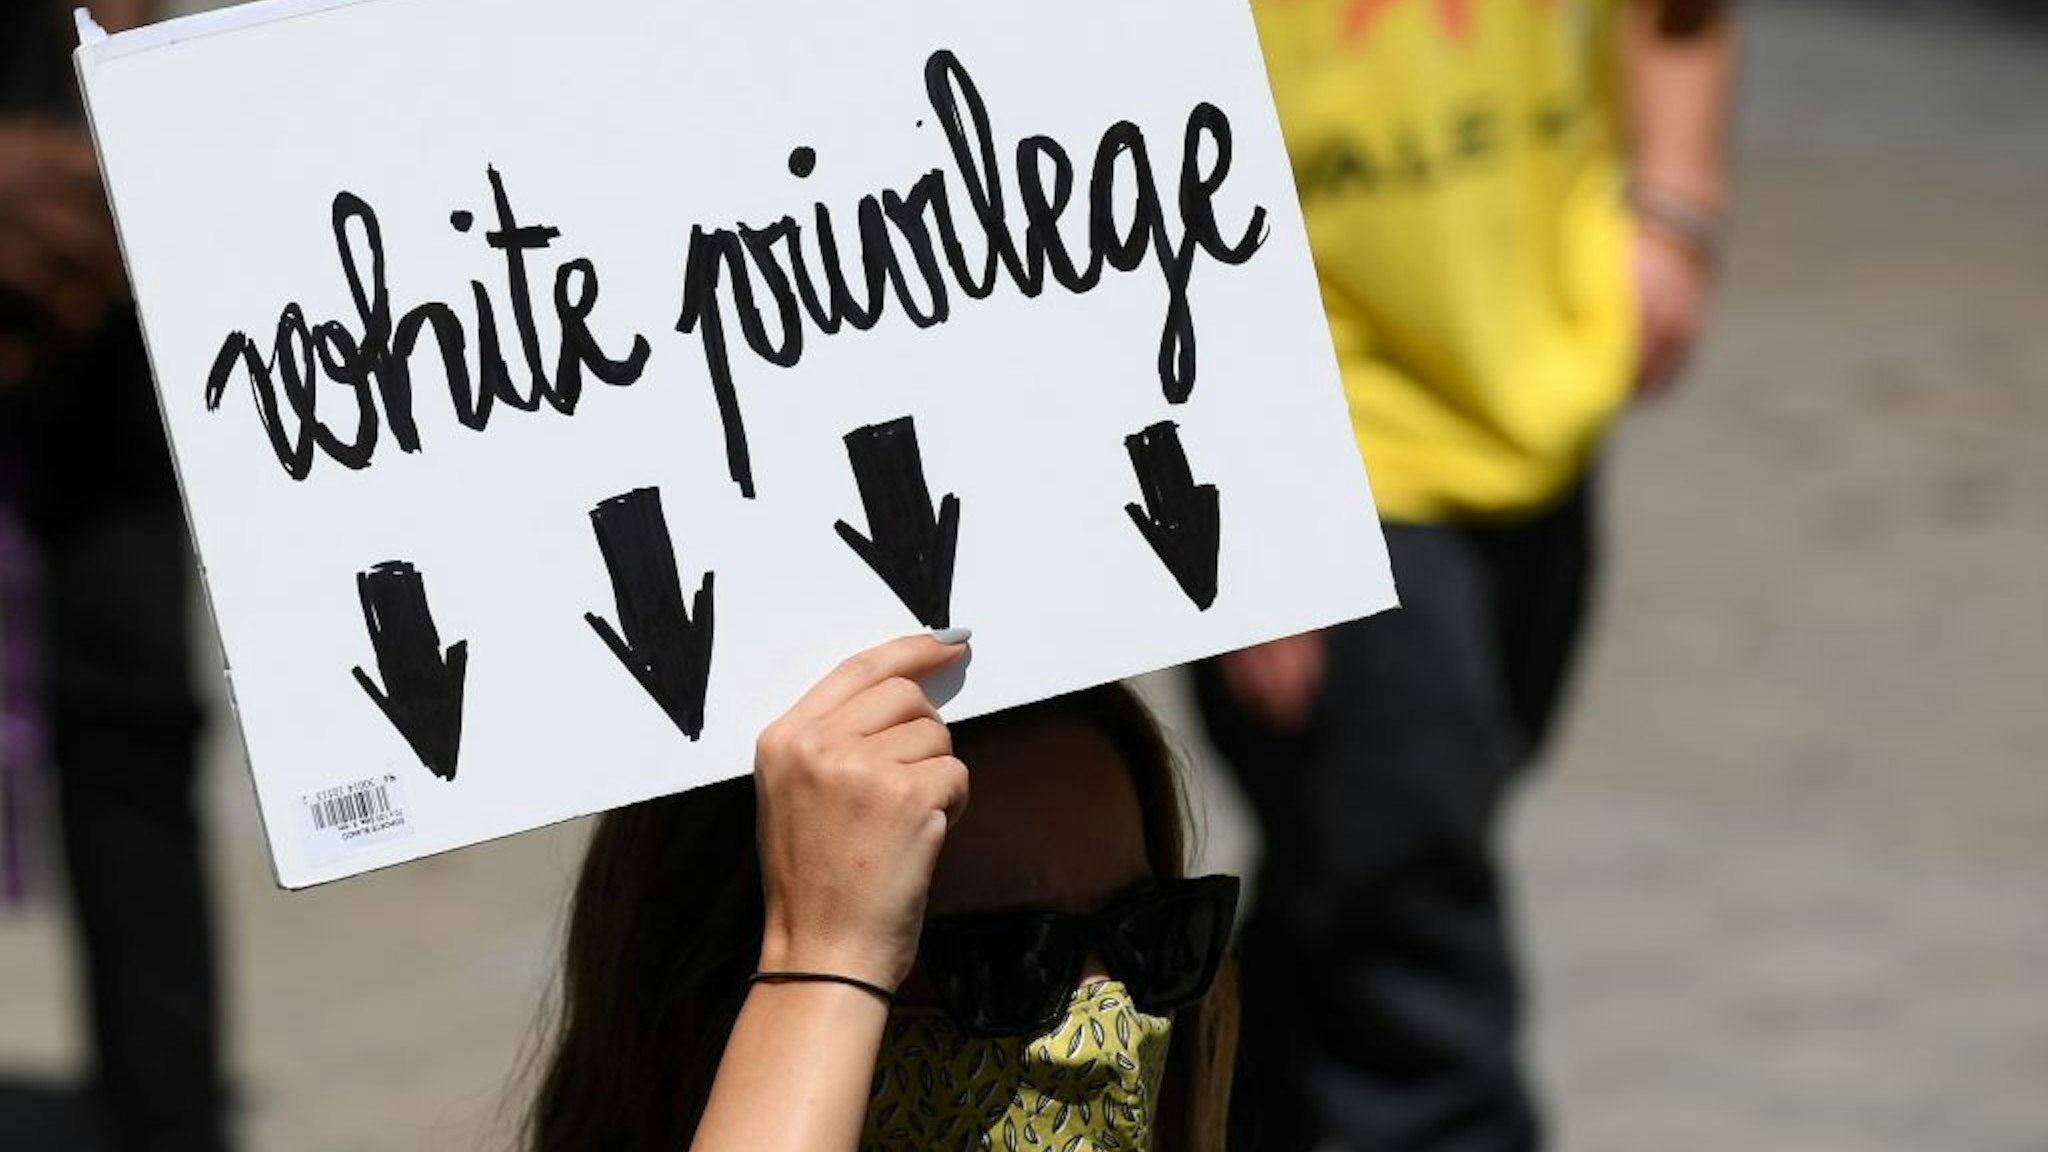 A woman holds a placard reading "White privilege" during a demonstration on June 14, 2020, in Barcelona, as part of the worldwide protests against racism and police brutality. - The protests are part of a worldwide movement following the killing in the United States of African-American man George Floyd who died after a white policeman knelt on his neck for several minutes. (Photo by Josep LAGO / AFP)